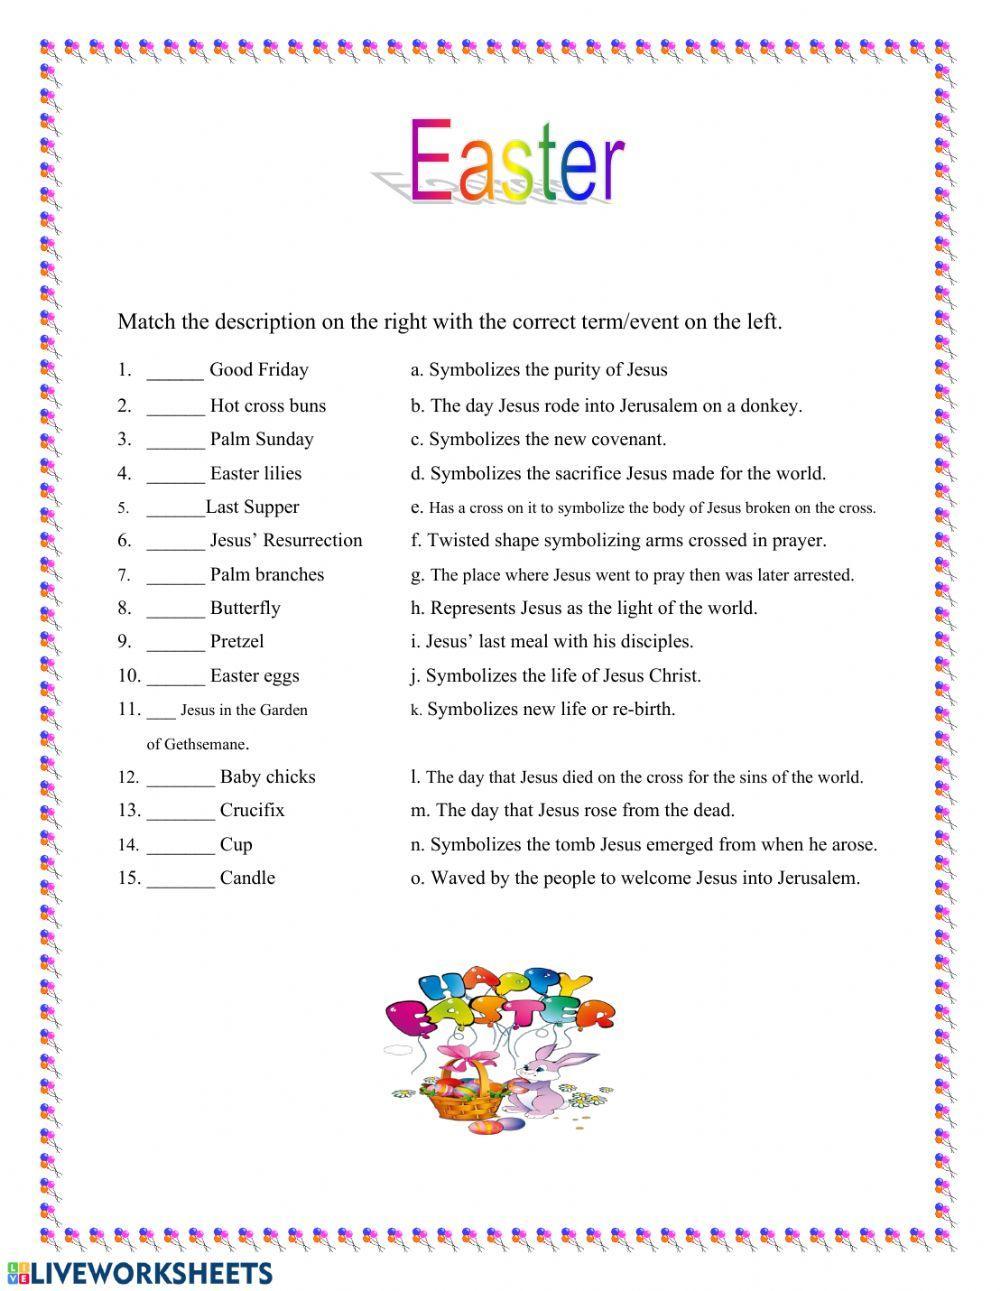 Easter Symbols and Events